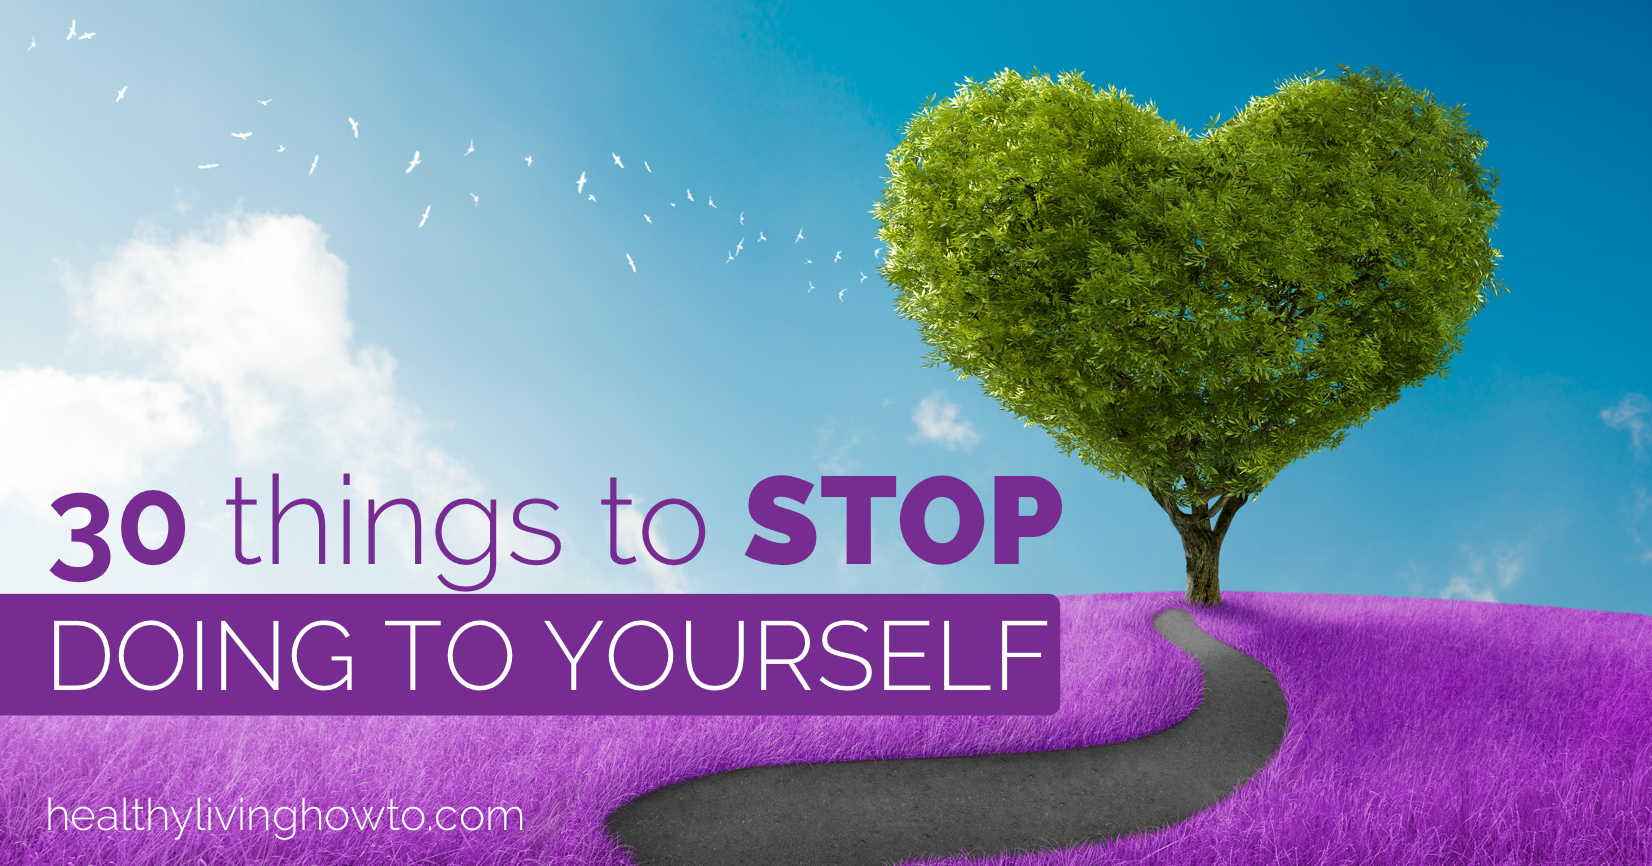 30 Things To Stop Doing To Yourself | healthylivinghowto.com